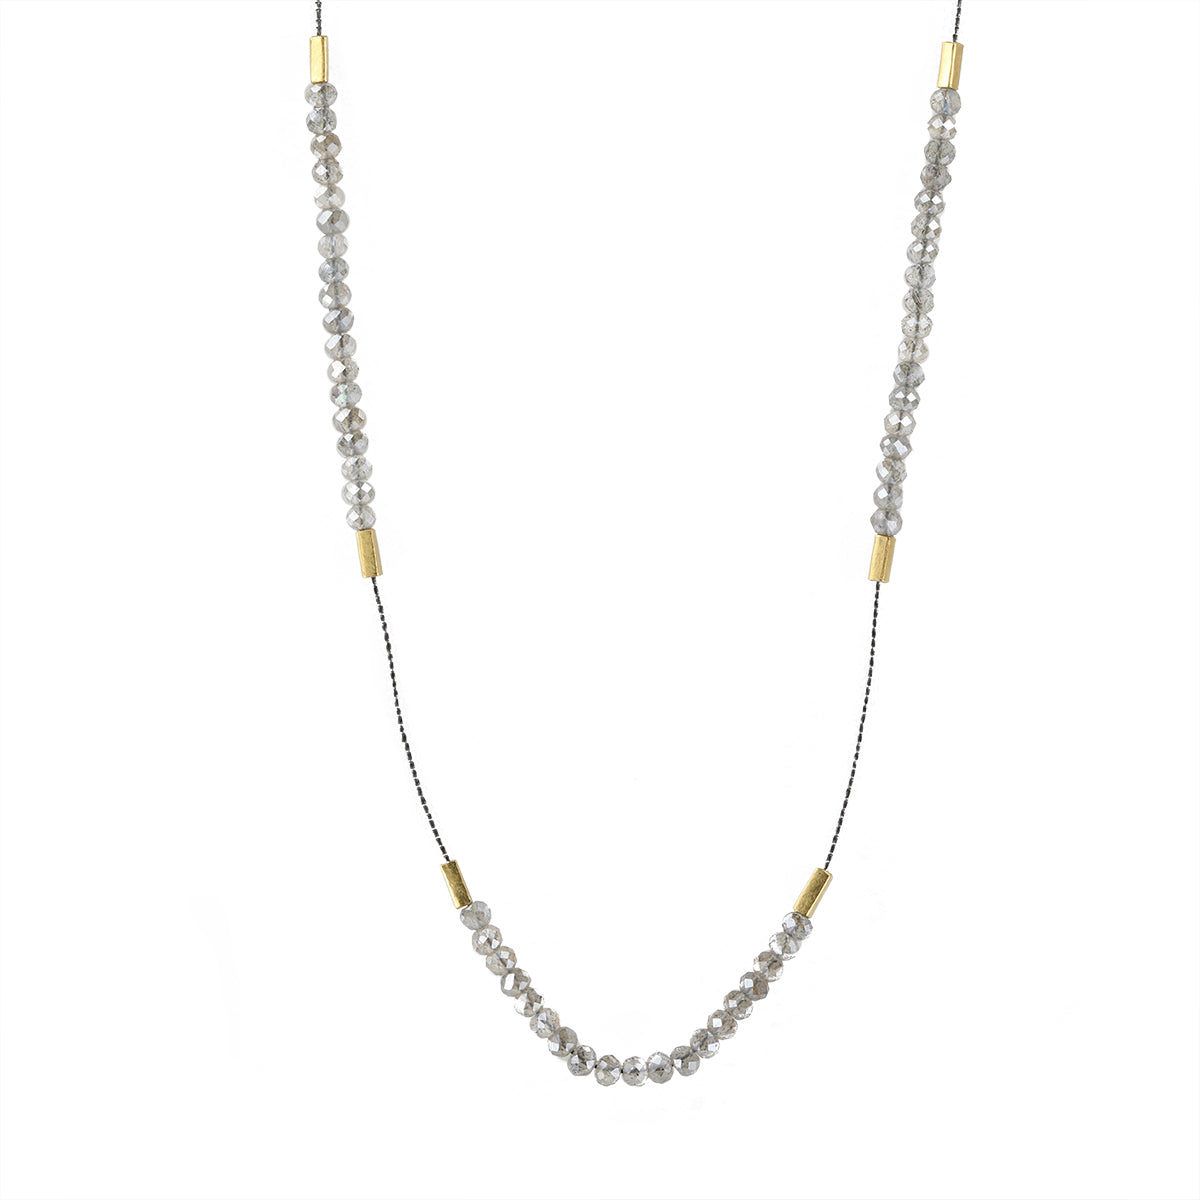 Triple Labradorite Station Necklace with Clear Seed Beads